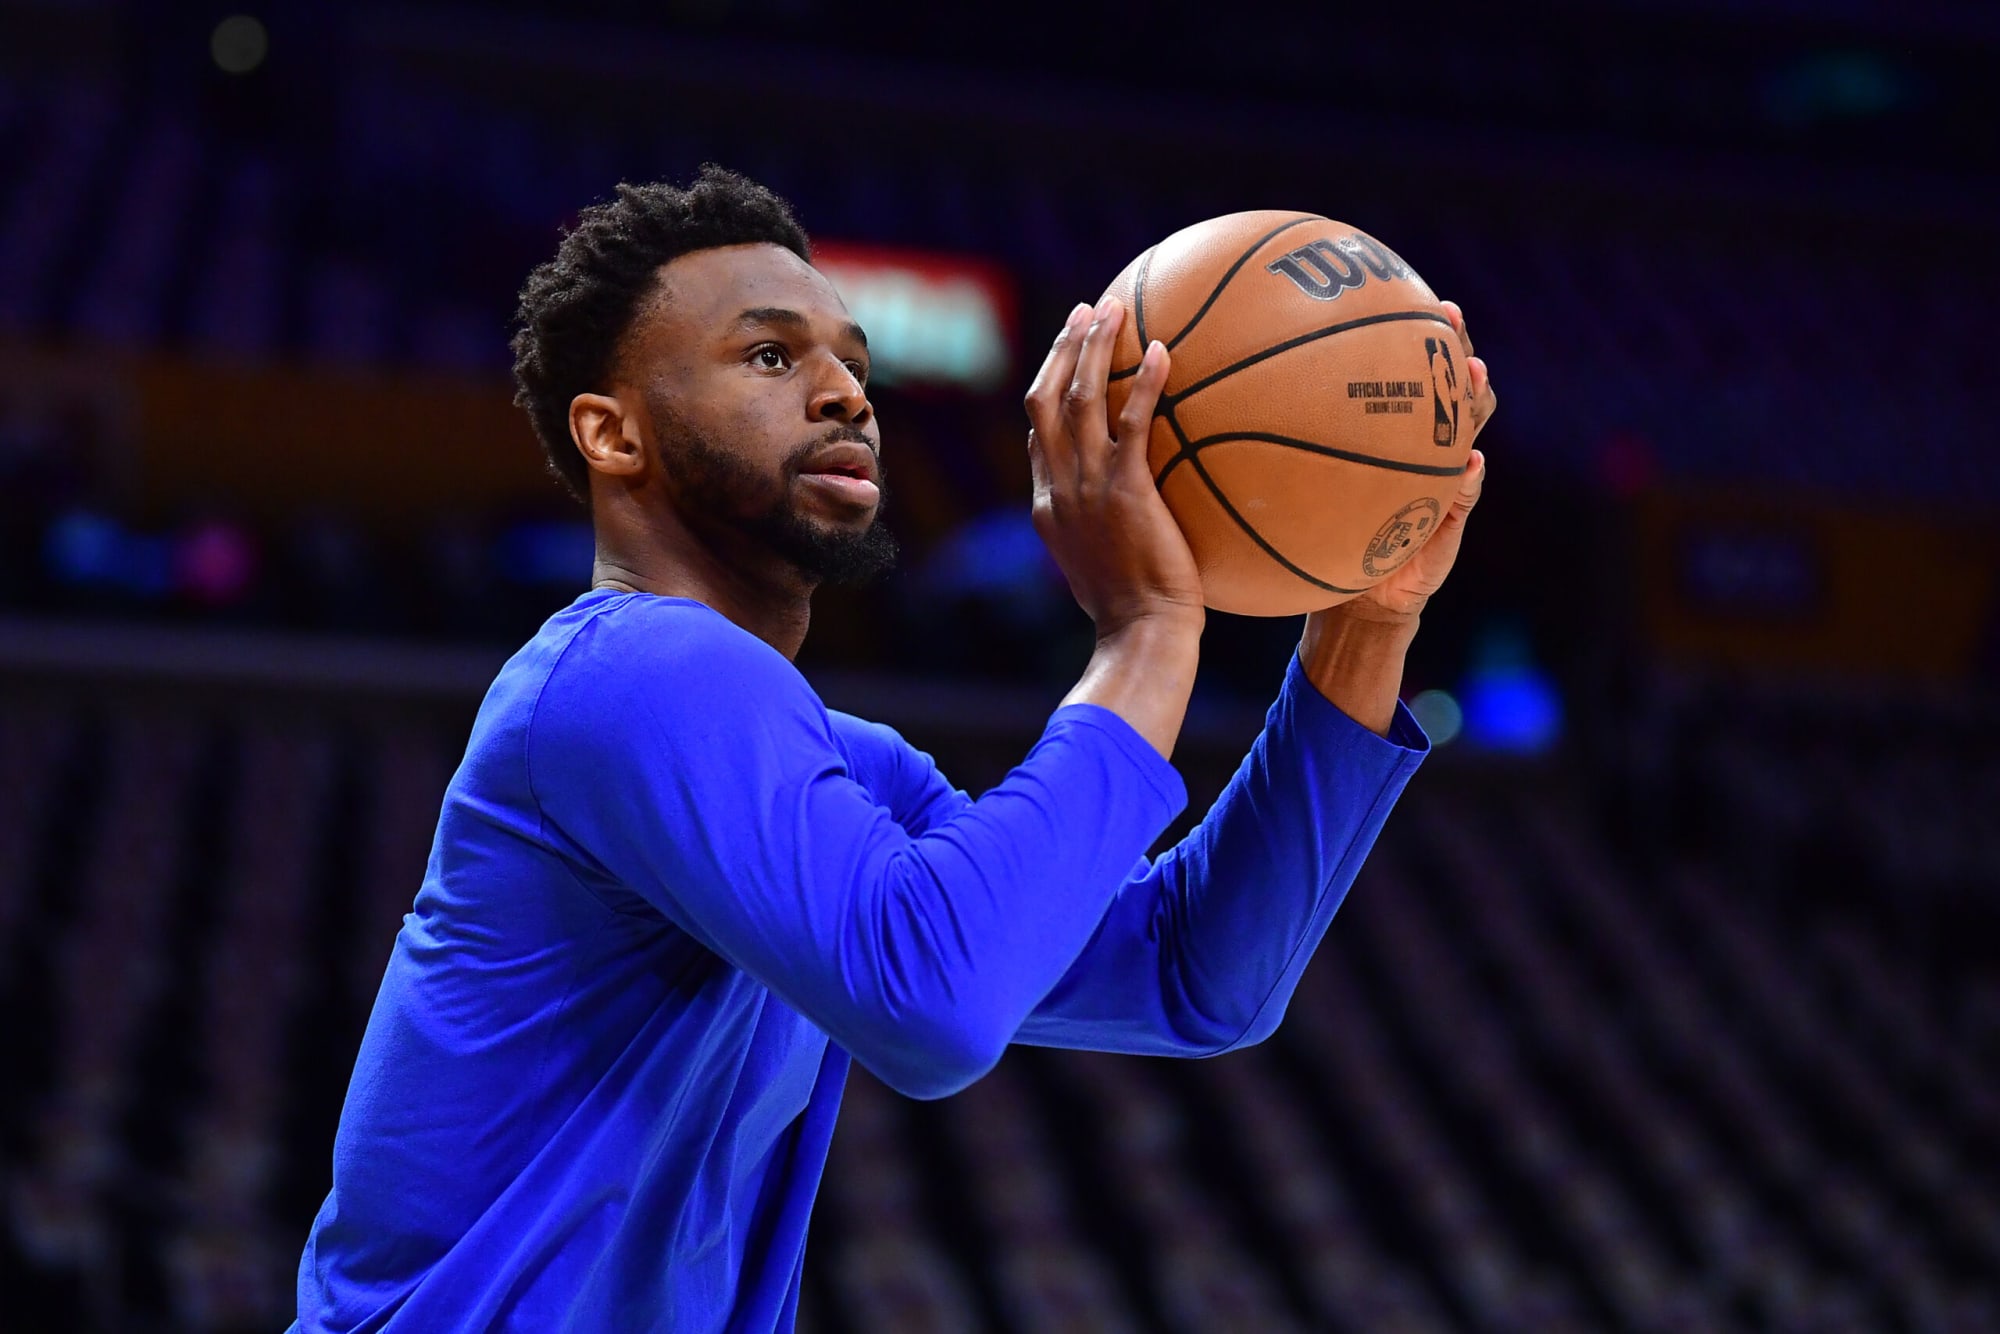 Golden State Warriors: 1 aspect for every player to improve upon – Andrew Wiggins